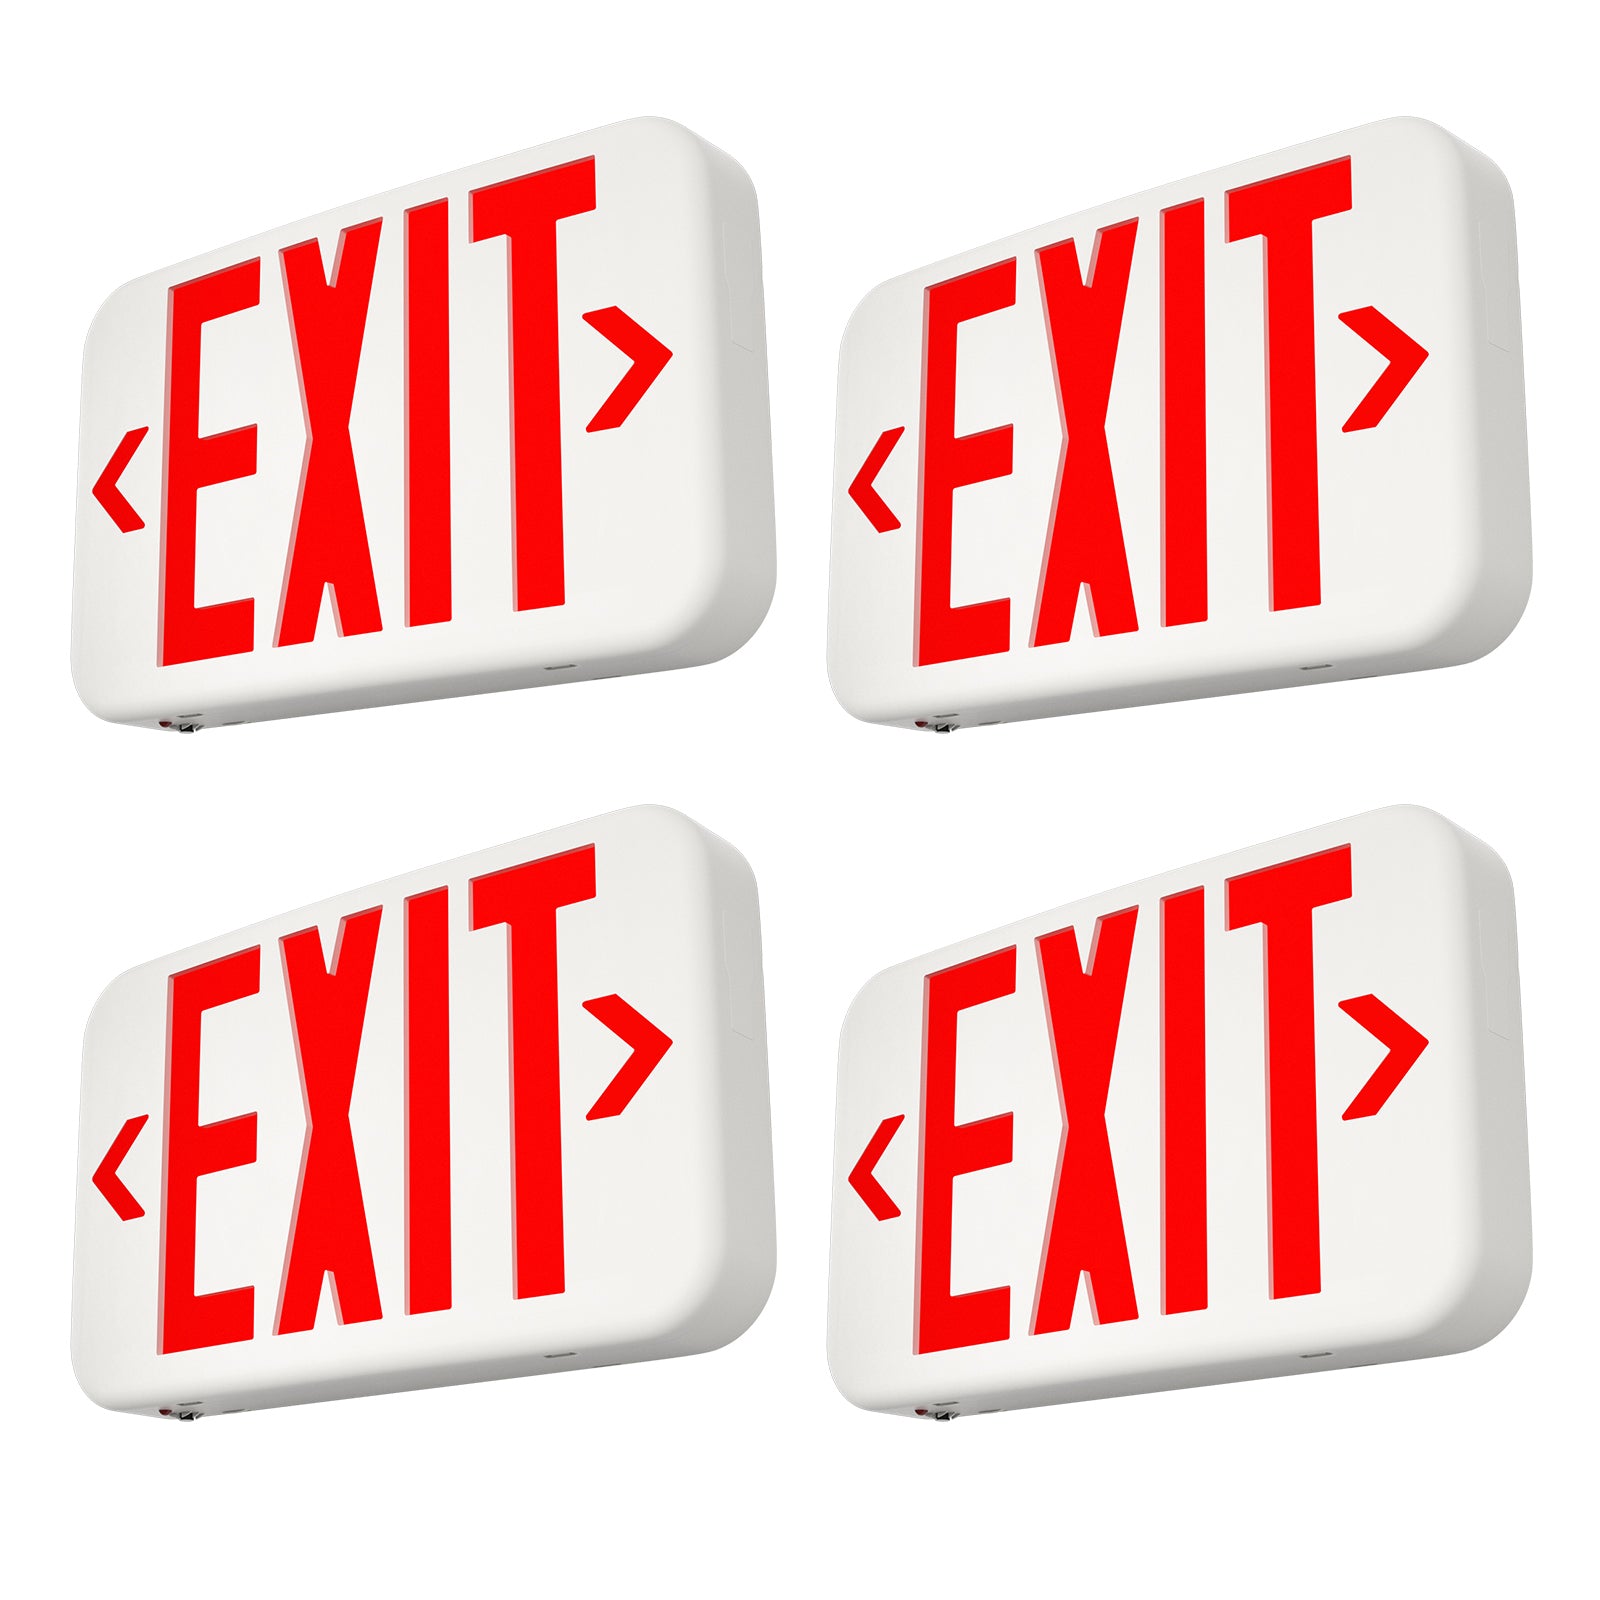 Red/Green LED Exit Sign with Battery Backup，Exit Sign for Business，Easy to Install，UL Certified，AC 120/277V，Pack of 4/6